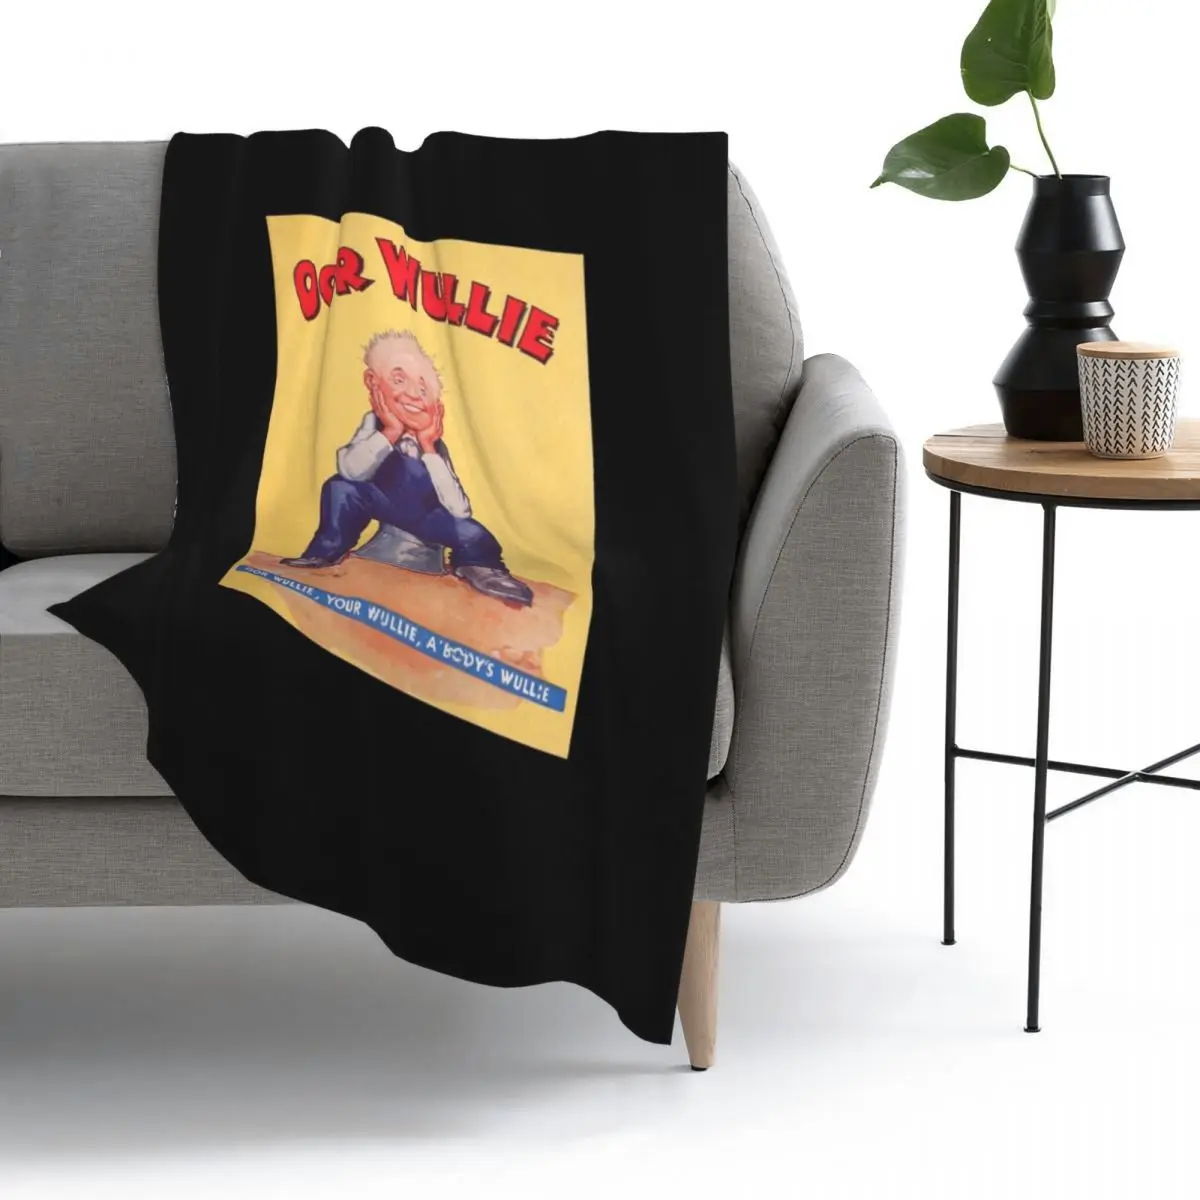 

Oor Wullie 1941 Vintage Print Blankets Flannel Multi-function Throw Blanket Sofa Throw Blanket for Couch Bedding Outdoor Throws